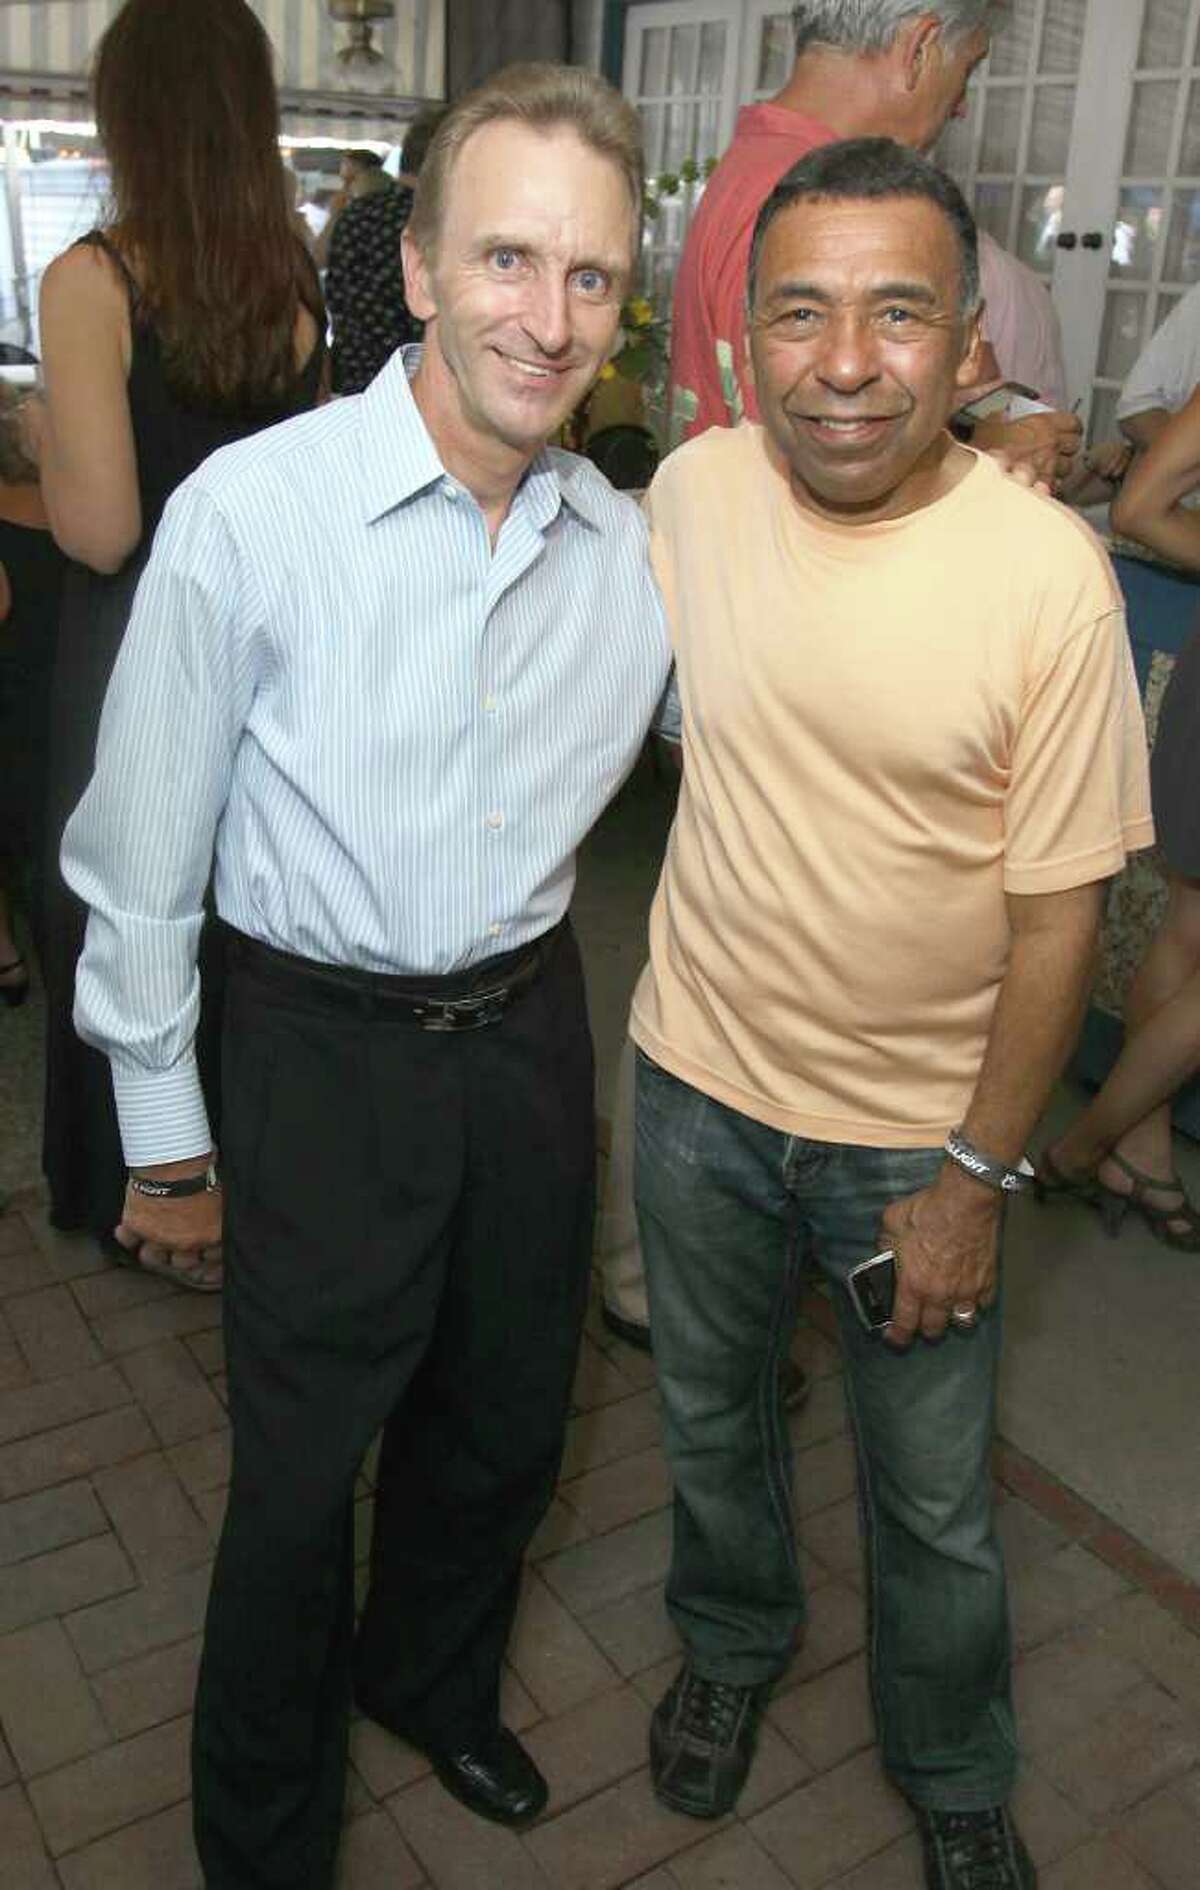 Saratoga Springs, NY - July 21, 2011 - (Photo by Joe Putrock/Special to the Times Union) - Legendary jockeys Jean-Luc Samyn(left) and Angel Cordero, Jr.(right) during the 18th Annual Earl B. Feiden Siro?’s Cup to benefit the Center for Disability Services Foundation.